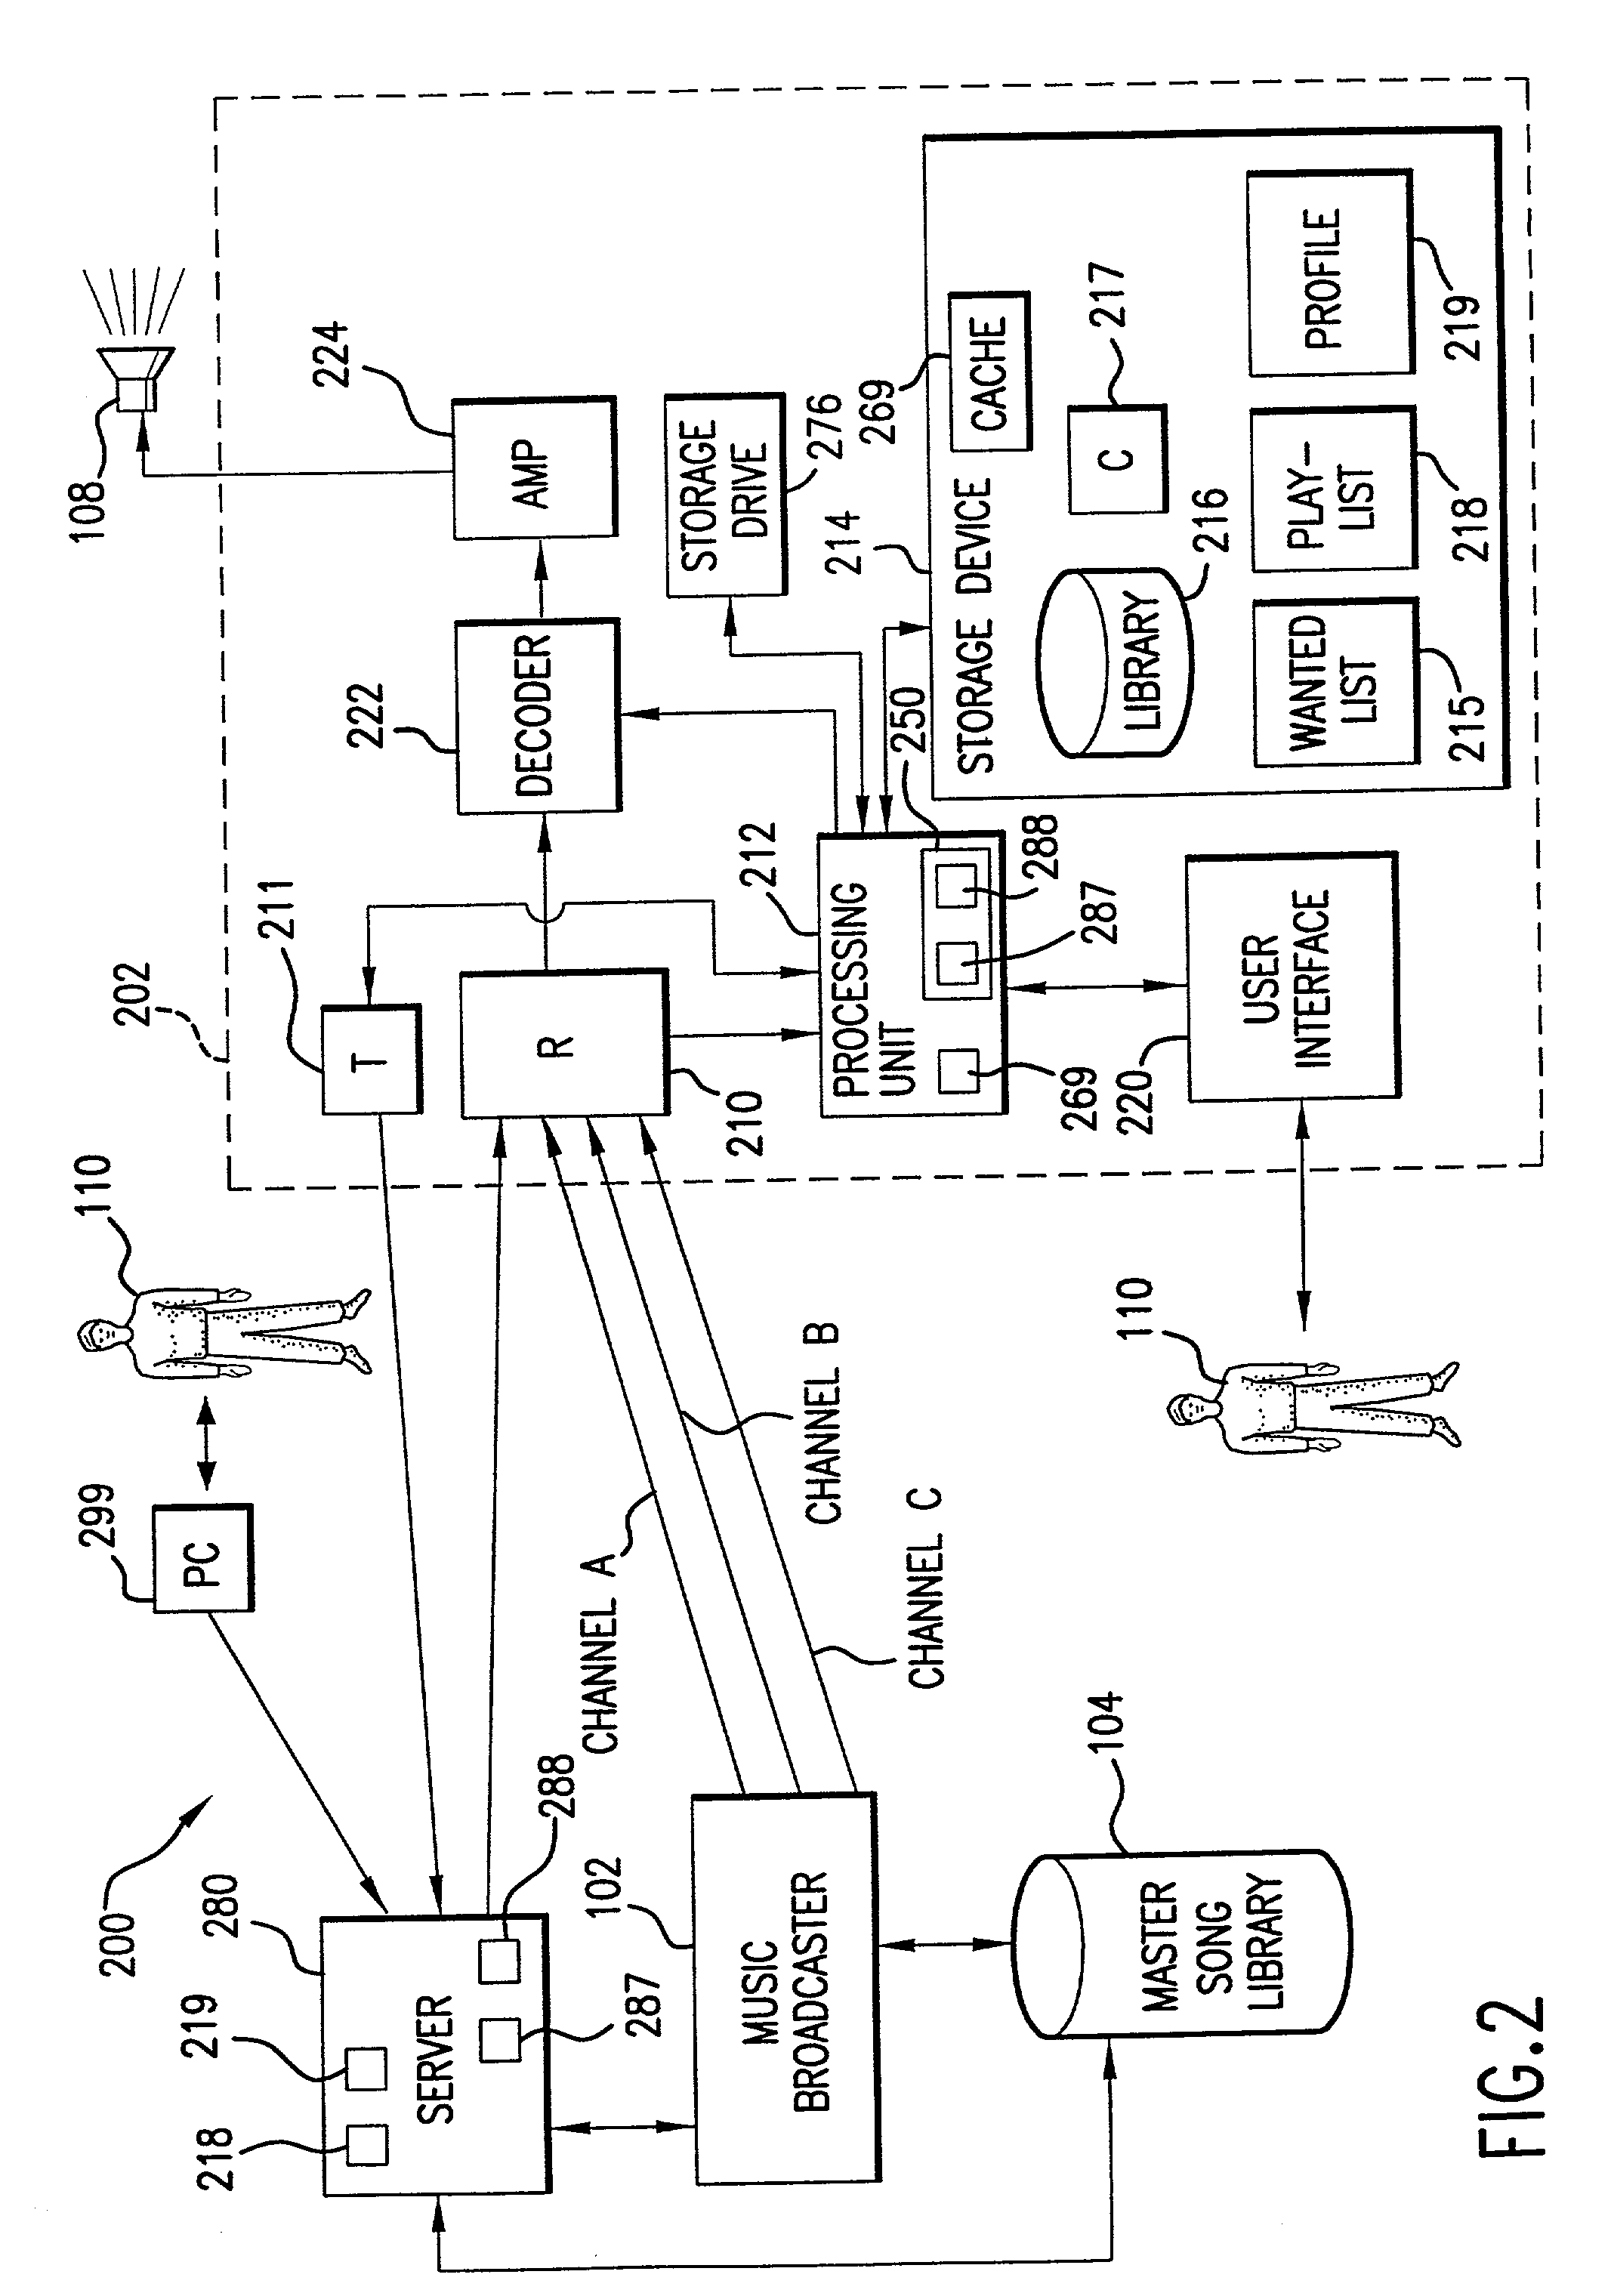 Personalized audio system and method